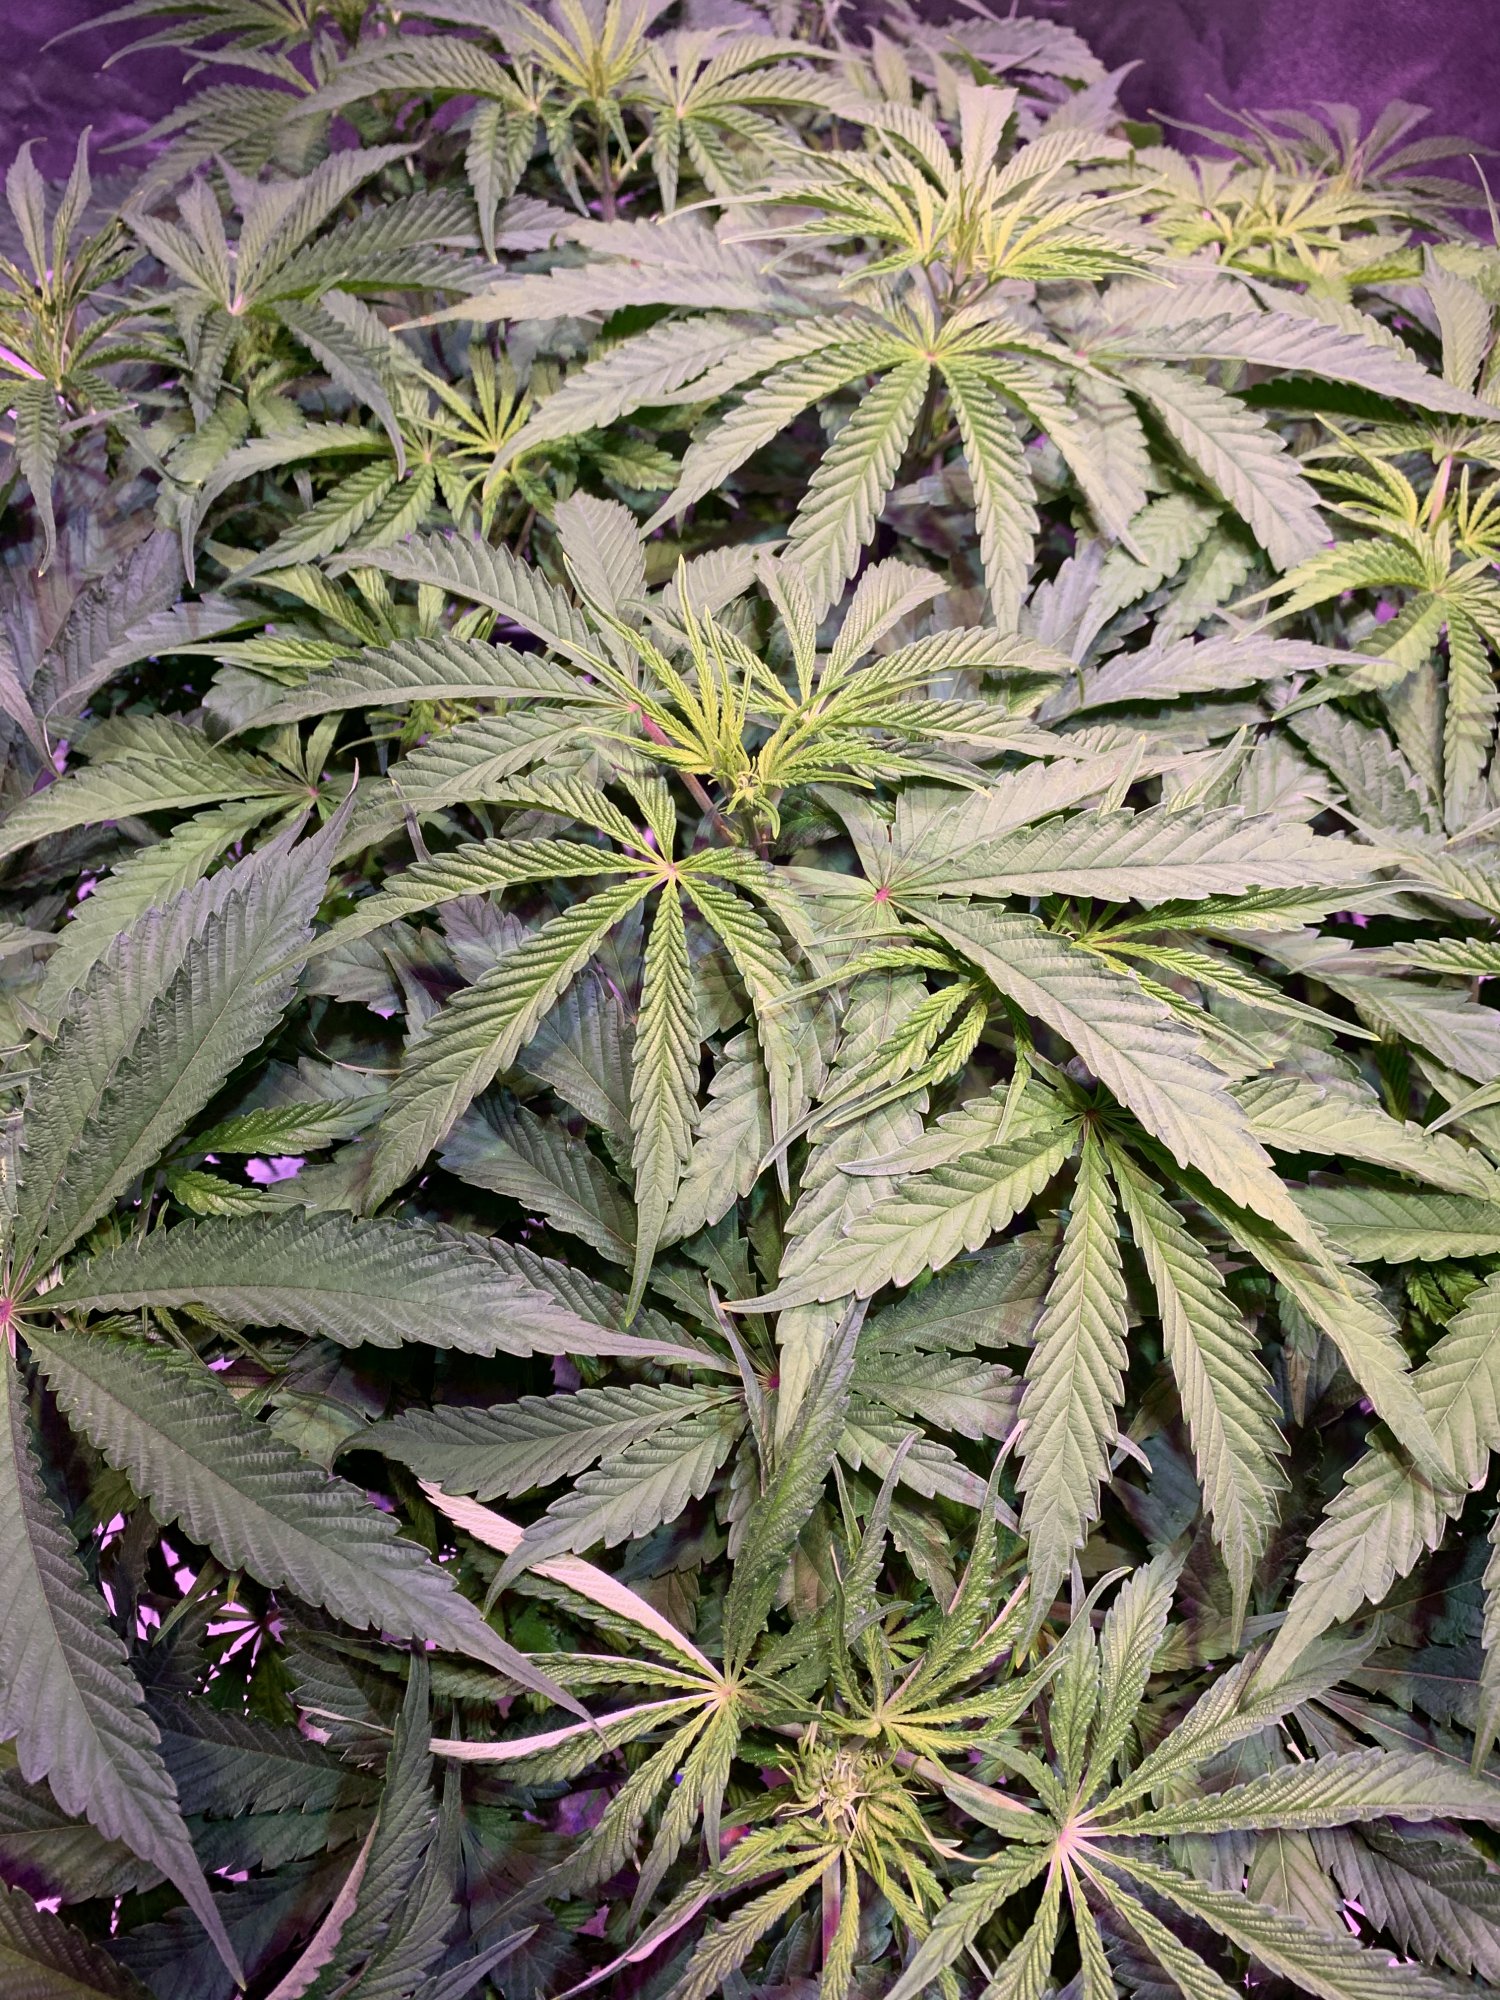 When to drop humidity for flower first grow 3